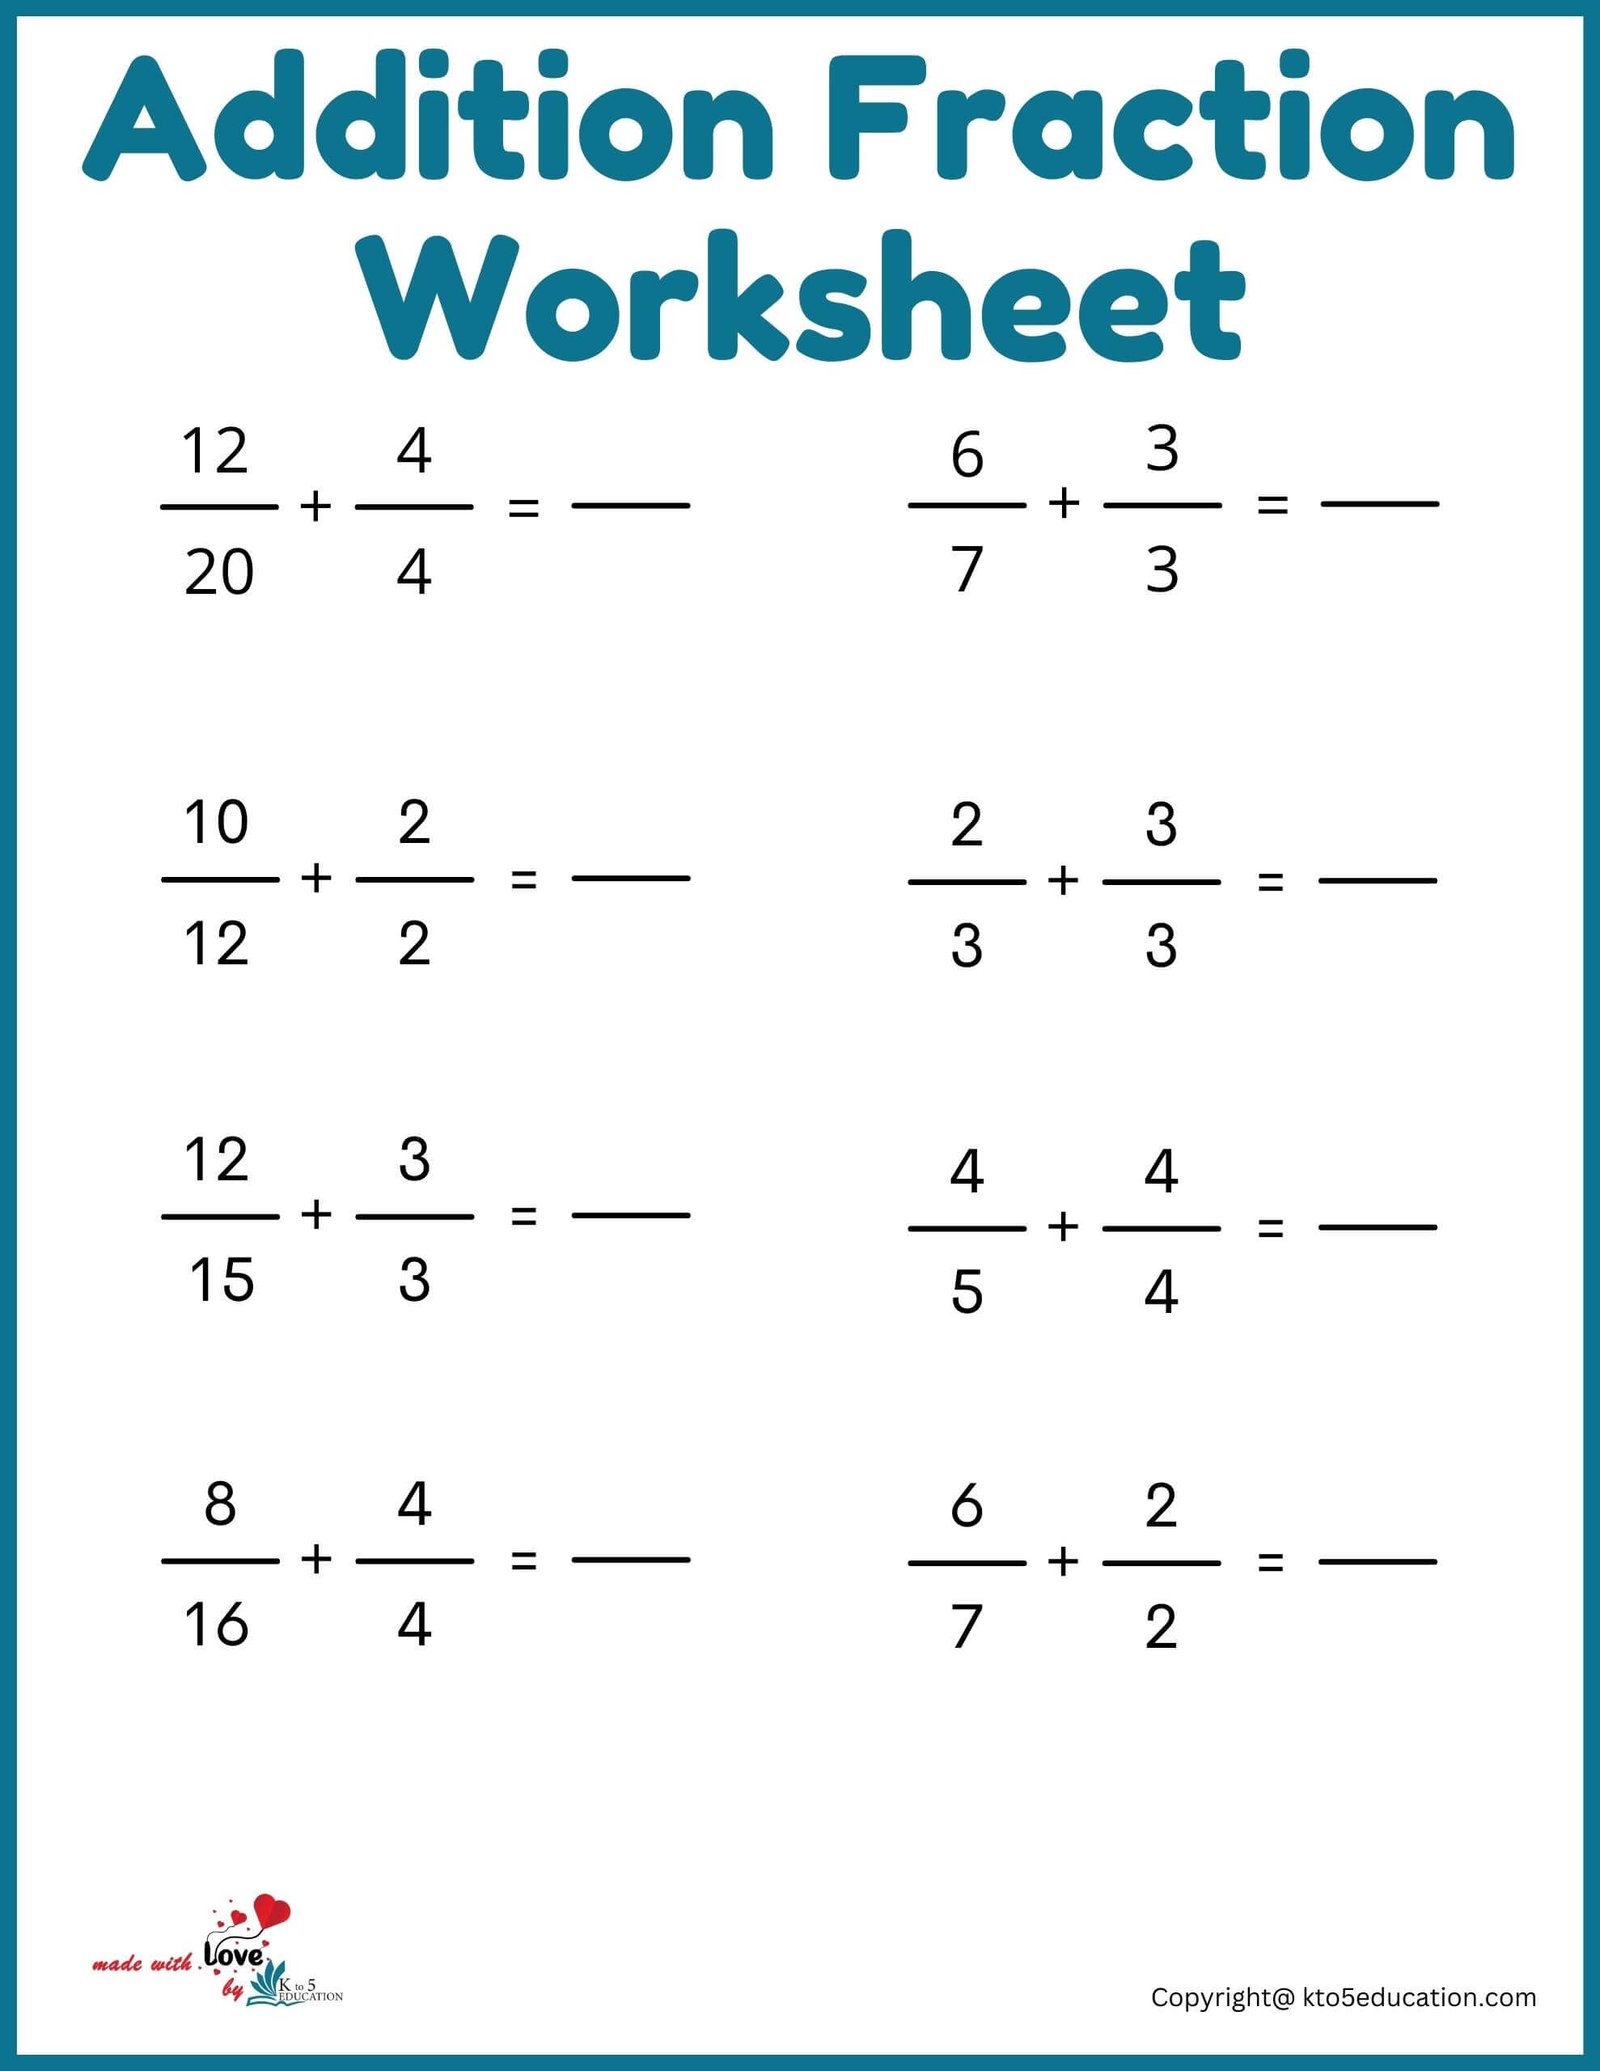 Additions Fractions Worksheets